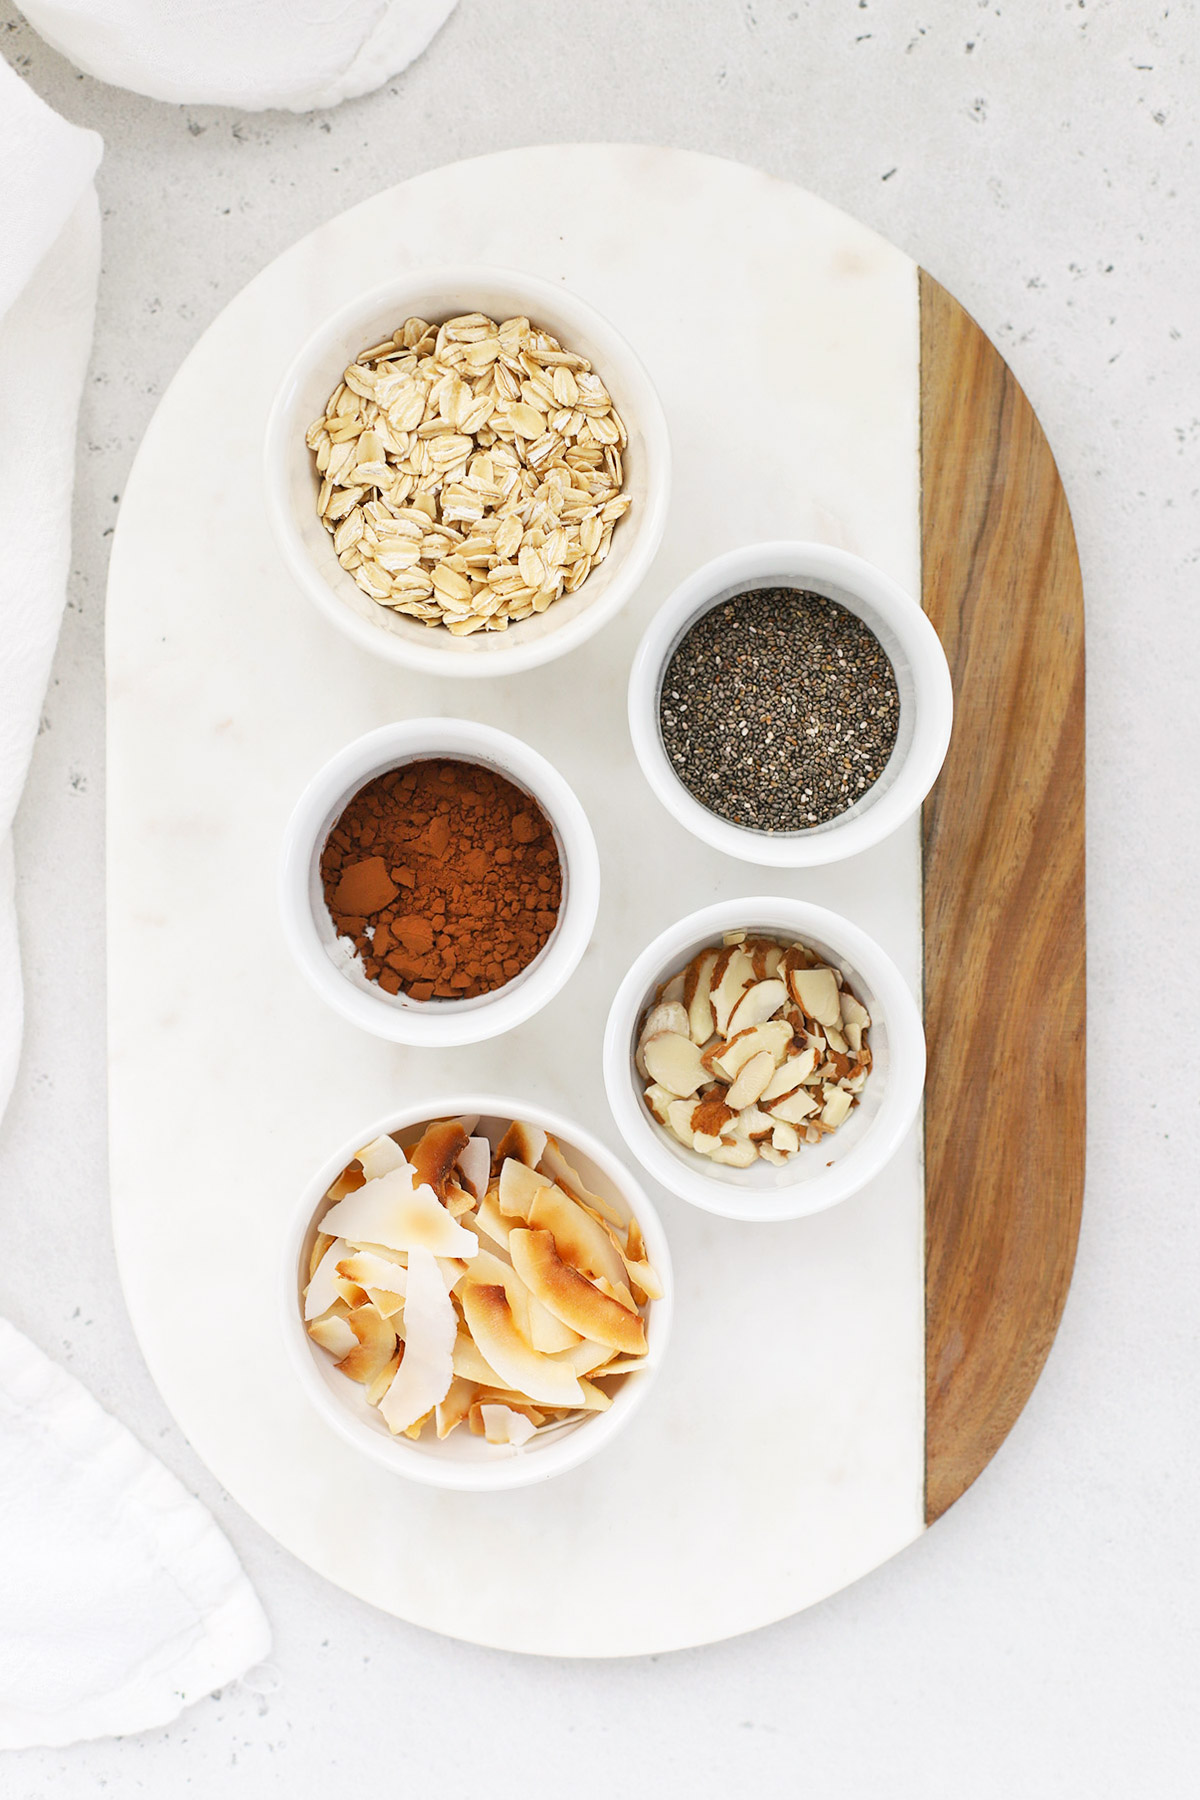 Overhead view of ingredients for making Almond Joy Overnight Oats